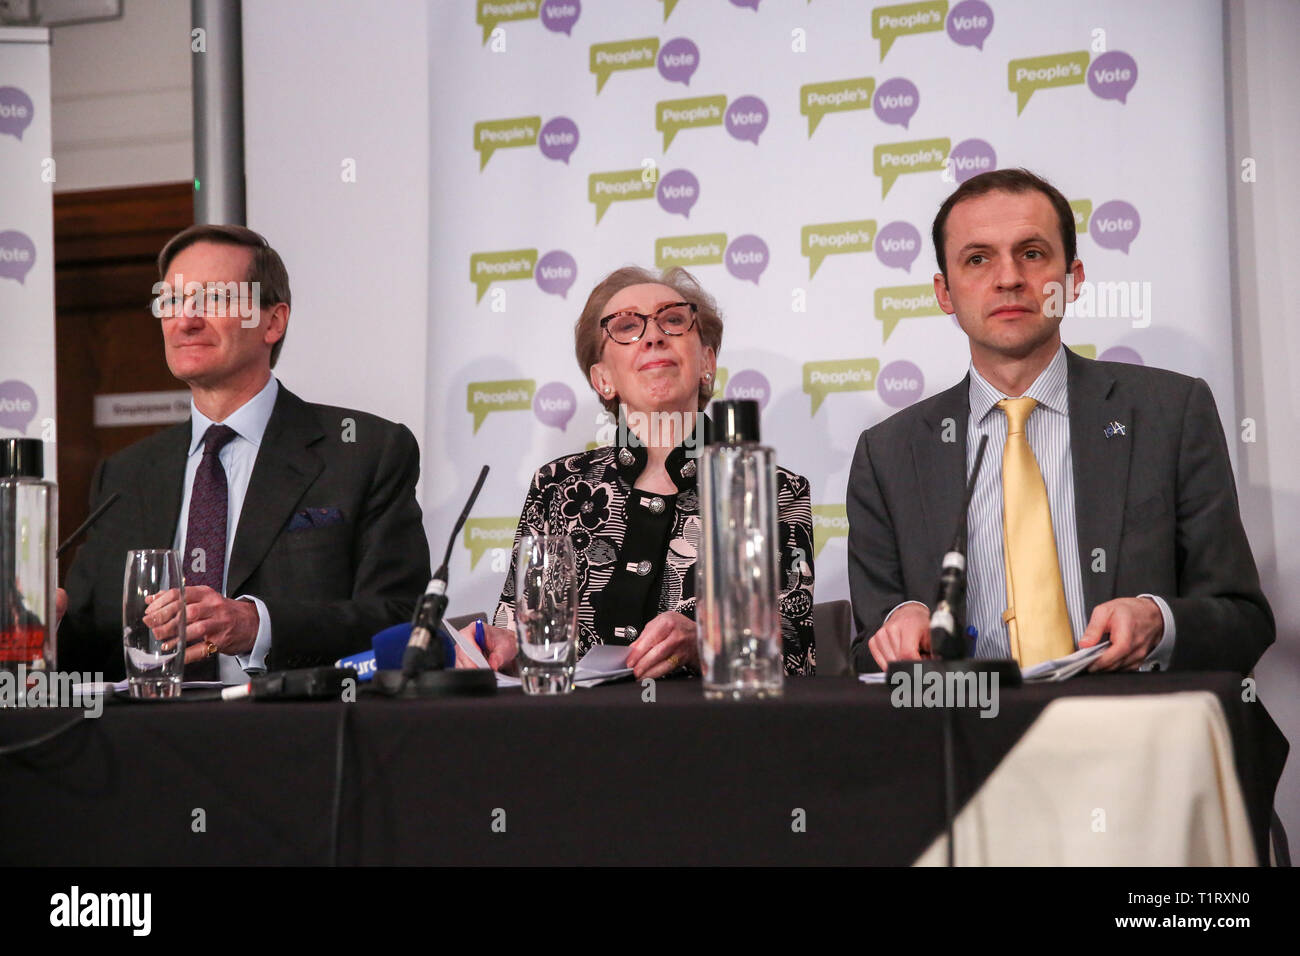 Conservative former Attorney General (L), Dominic Grieve MP - Labour former Foreign Secretary (C), Margaret Beckett MP - SNP Foreign Affairs and Europe (R) Stephen Gethins are seen at a People's Vote press conference in Westminster setting out an analysis of the different Brexit options facing Members of Parliament in indicative votes.  British Prime Minister Theresa May told the backbench Tory MPs this evening that she will stand down if they back her EU withdrawal deal. Stock Photo